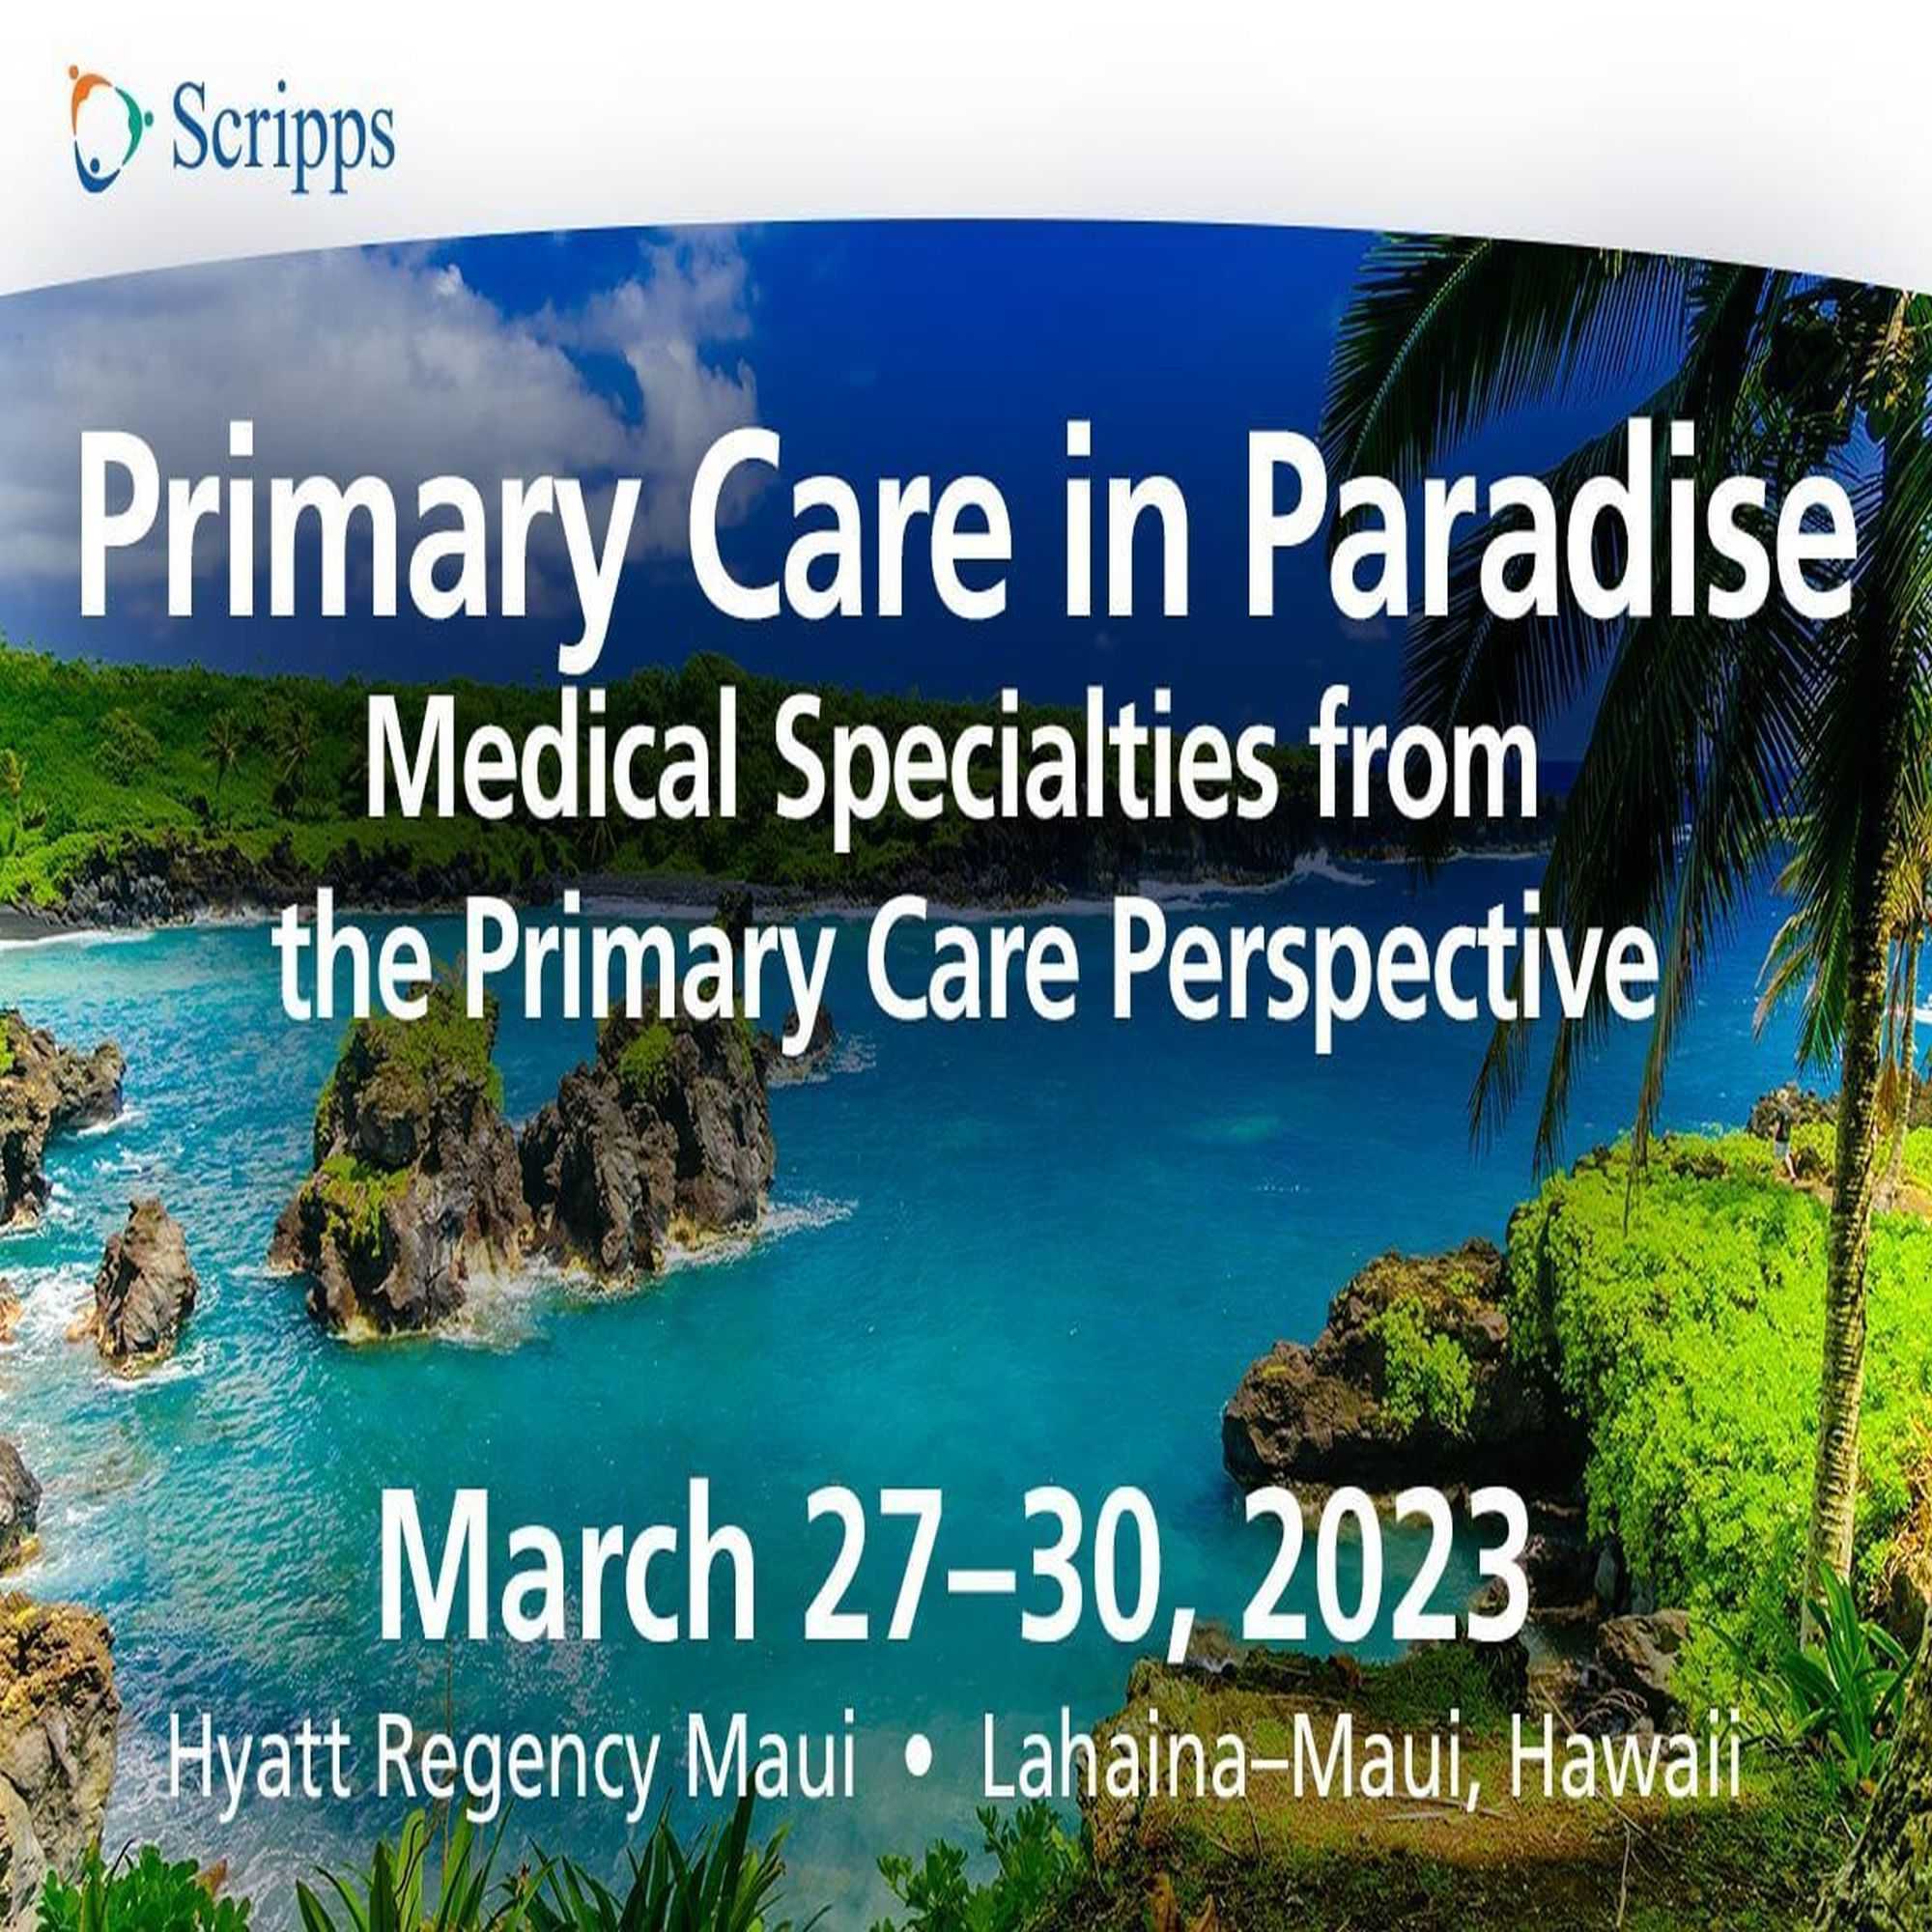 Scripps 2023 Primary Care in Paradise CME Conference - Maui, Hawaii